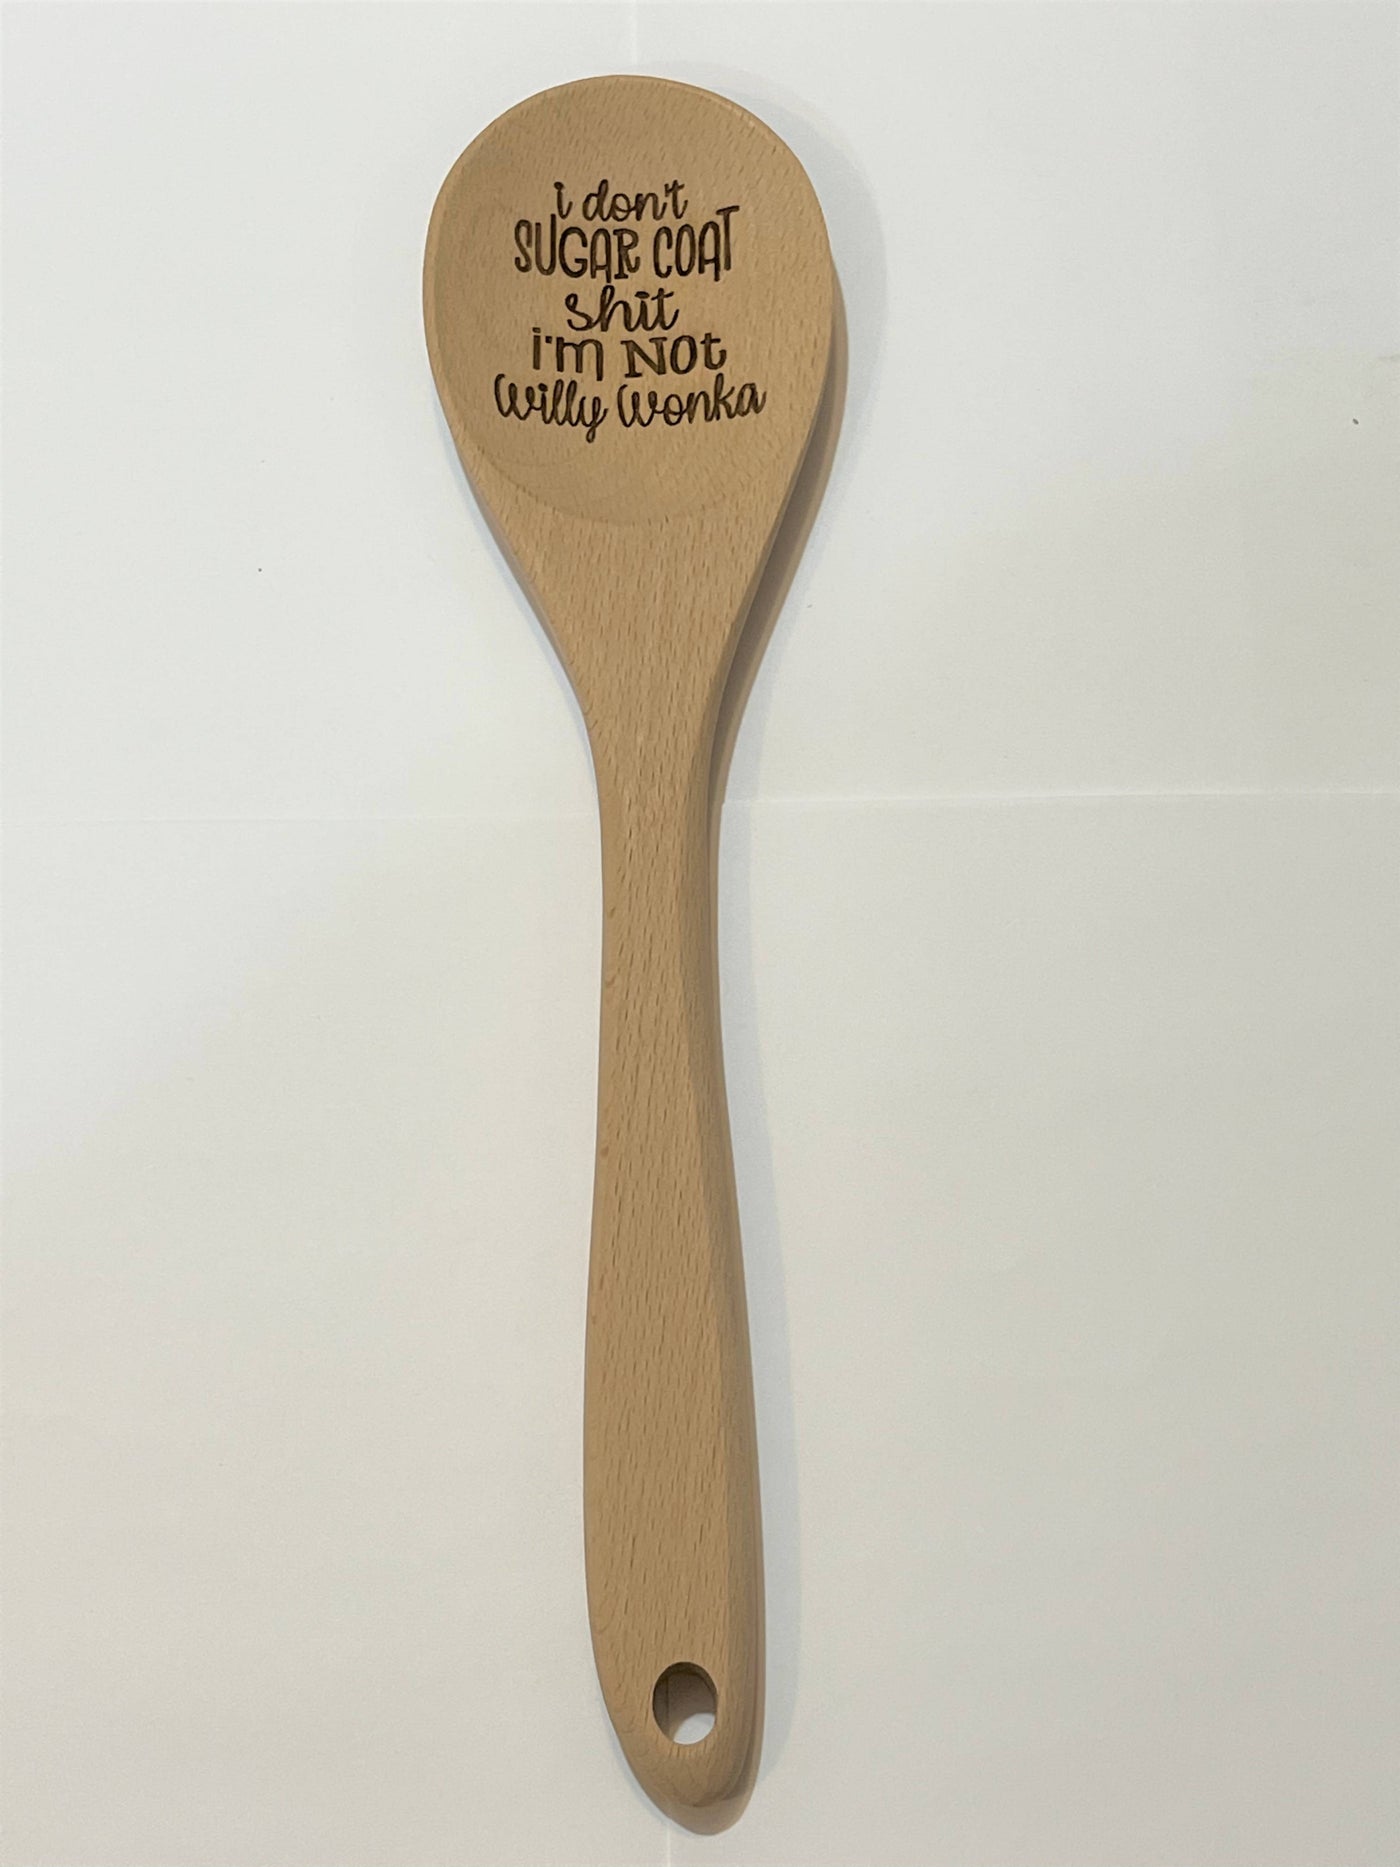 Willy Wonka Wooden Spoon